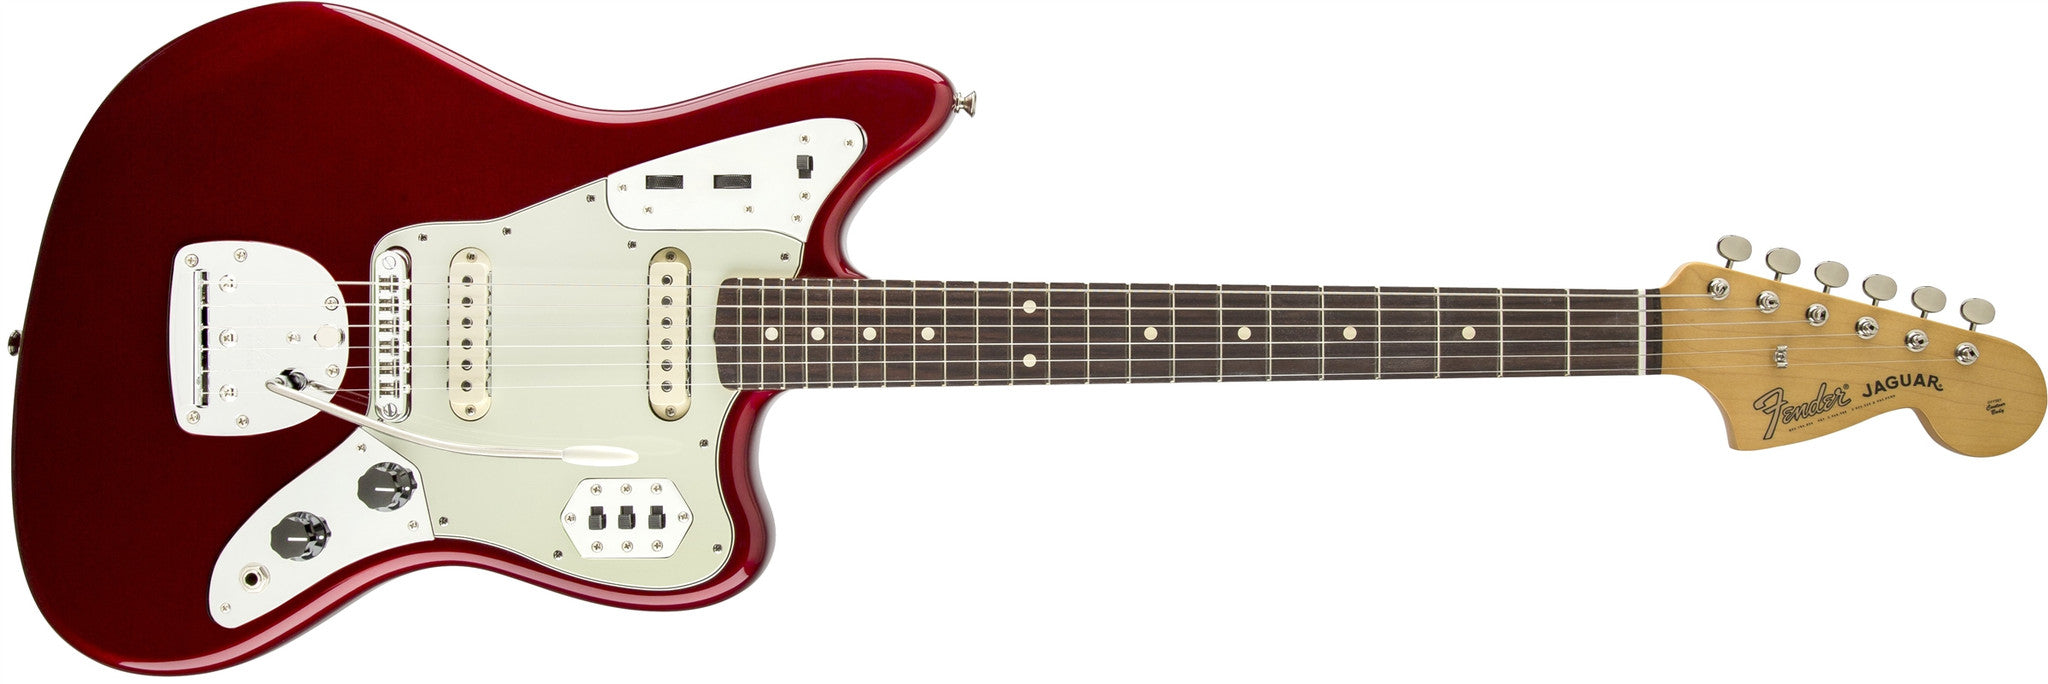 Fender Classic Player Jaguar Special, Rosewood Fingerboard, Candy Apple Red  0141700309